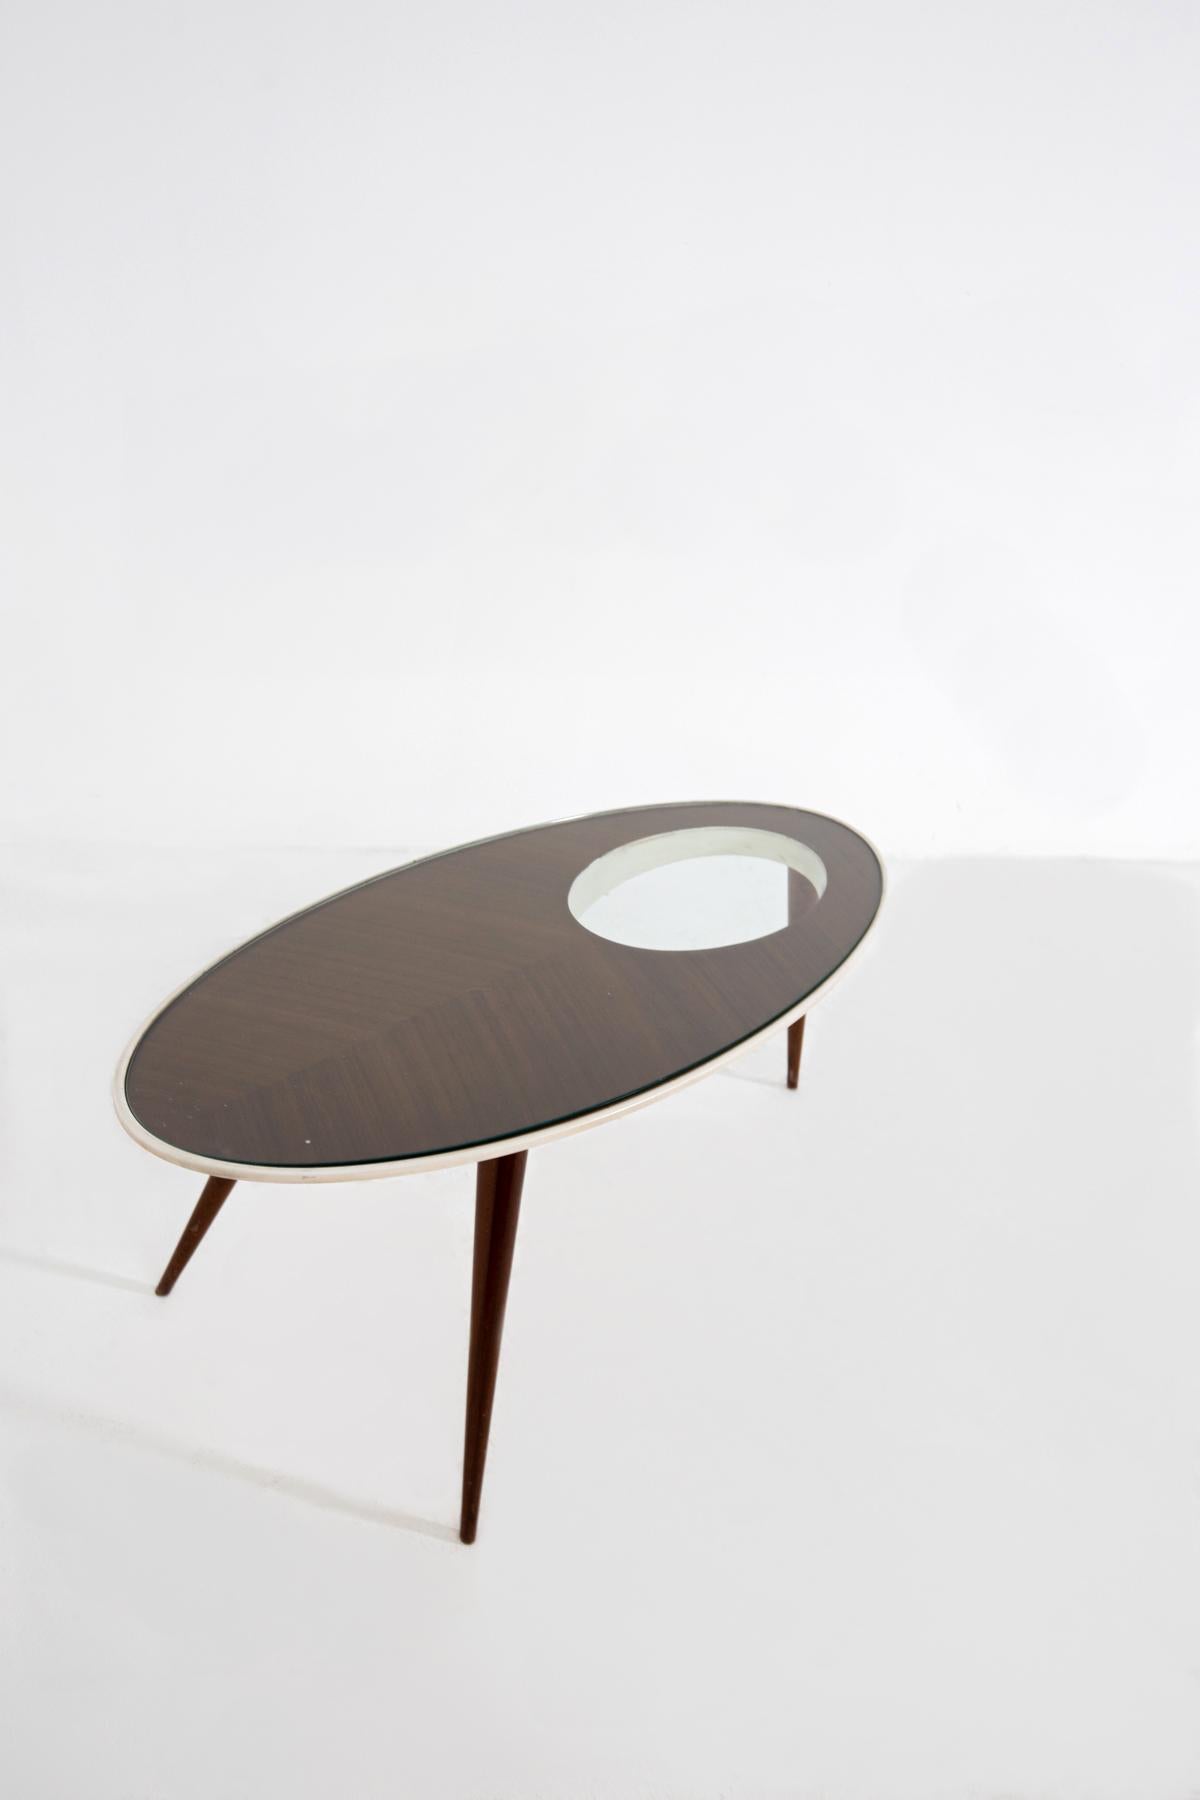 Vintage Italian Coffee Table Inspired by Gio Ponti 2